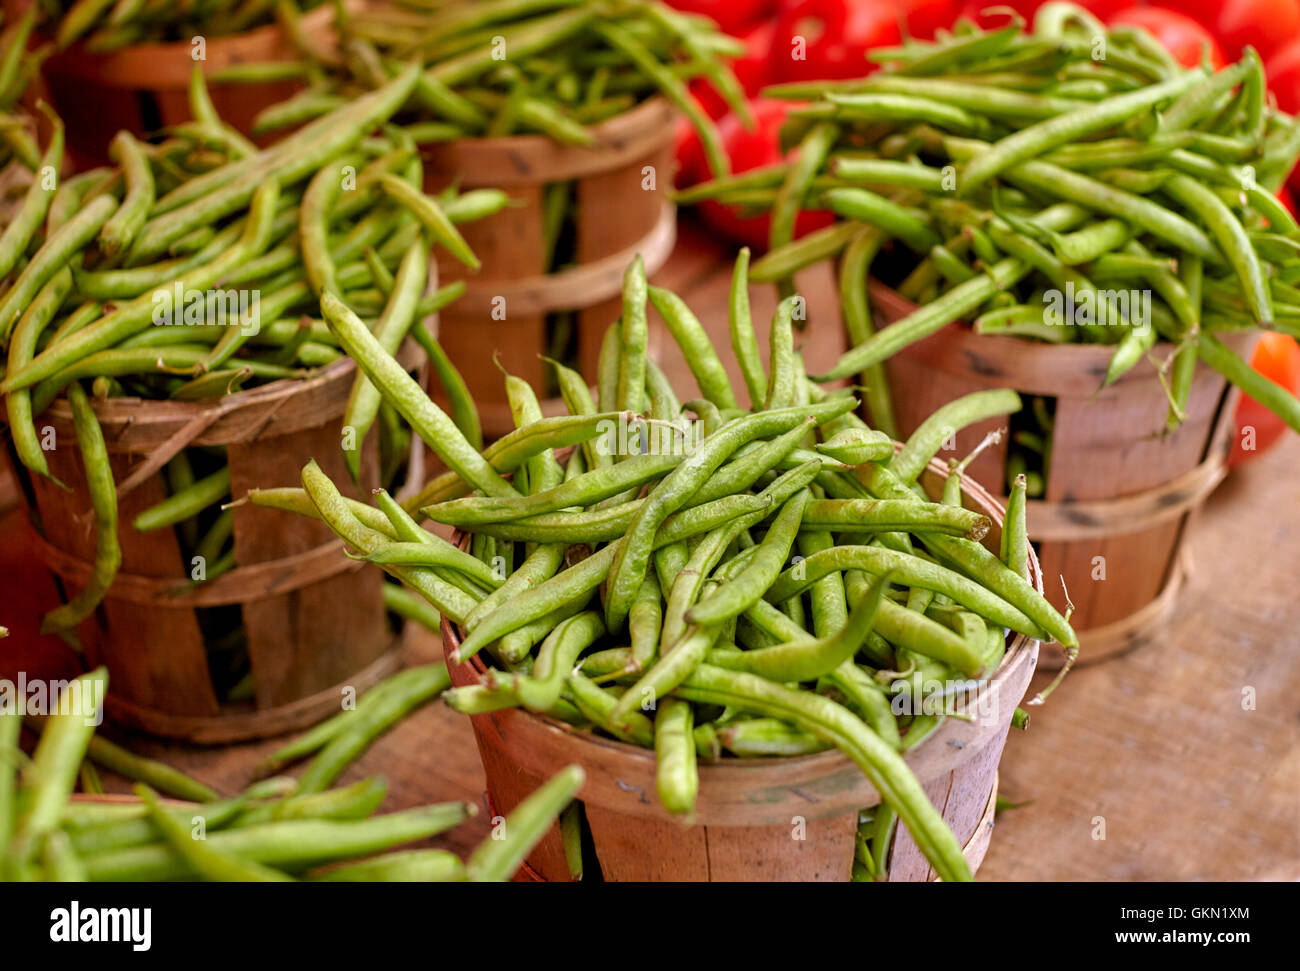 How Much Is A Bushel Of Green Beans